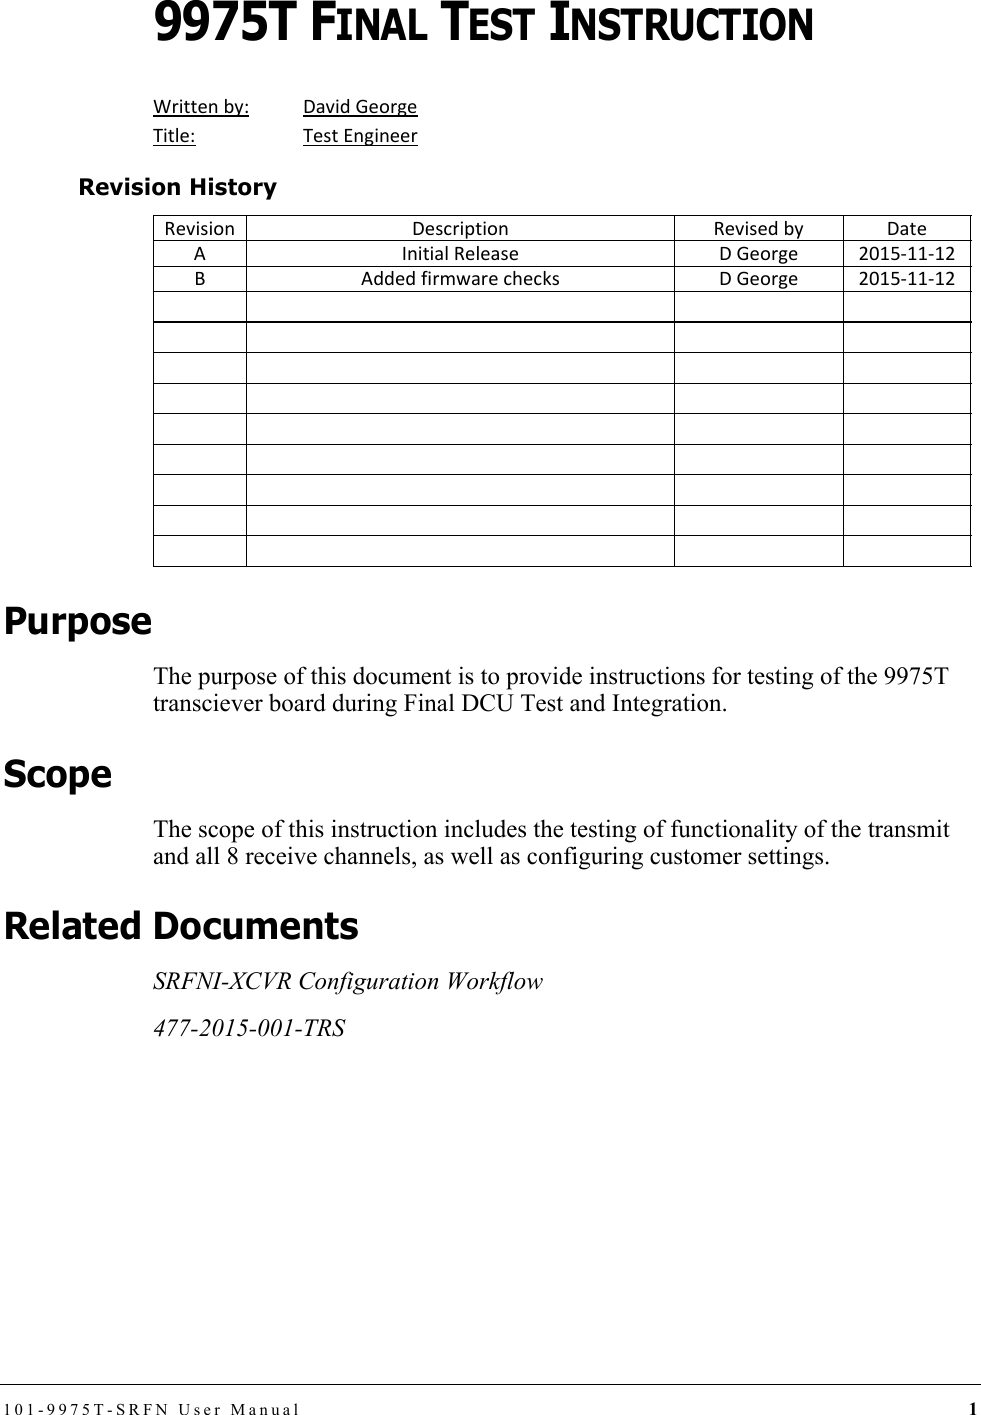 101-9975T-SRFN User Manual 19975T FINAL TEST INSTRUCTIONWrittenby: DavidGeorgeTitle: TestEngineerRevision HistoryPurposeThe purpose of this document is to provide instructions for testing of the 9975T transciever board during Final DCU Test and Integration.ScopeThe scope of this instruction includes the testing of functionality of the transmit and all 8 receive channels, as well as configuring customer settings.Related DocumentsSRFNI-XCVR Configuration Workflow477-2015-001-TRSRevision Description Revisedby DateAInitialRelease DGeorge 2015‐11‐12B AddedfirmwarechecksDGeorge 2015‐11‐12DRAFT